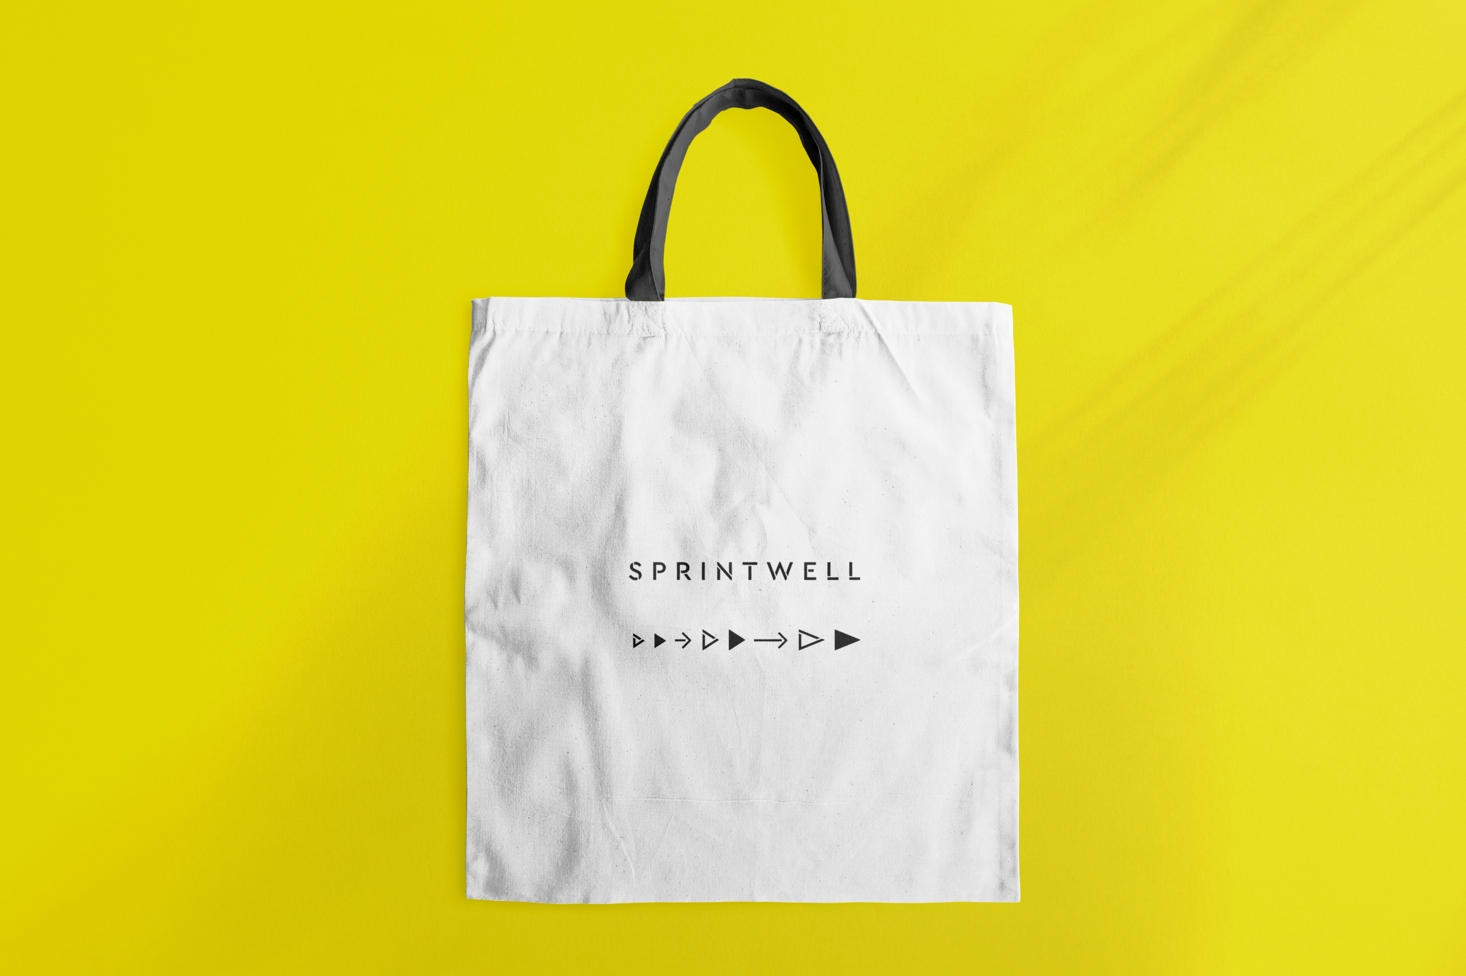 A white Sprintwell-branded tote bag with black handles with text “Sprintwell” and iconography sits on a yellow background.